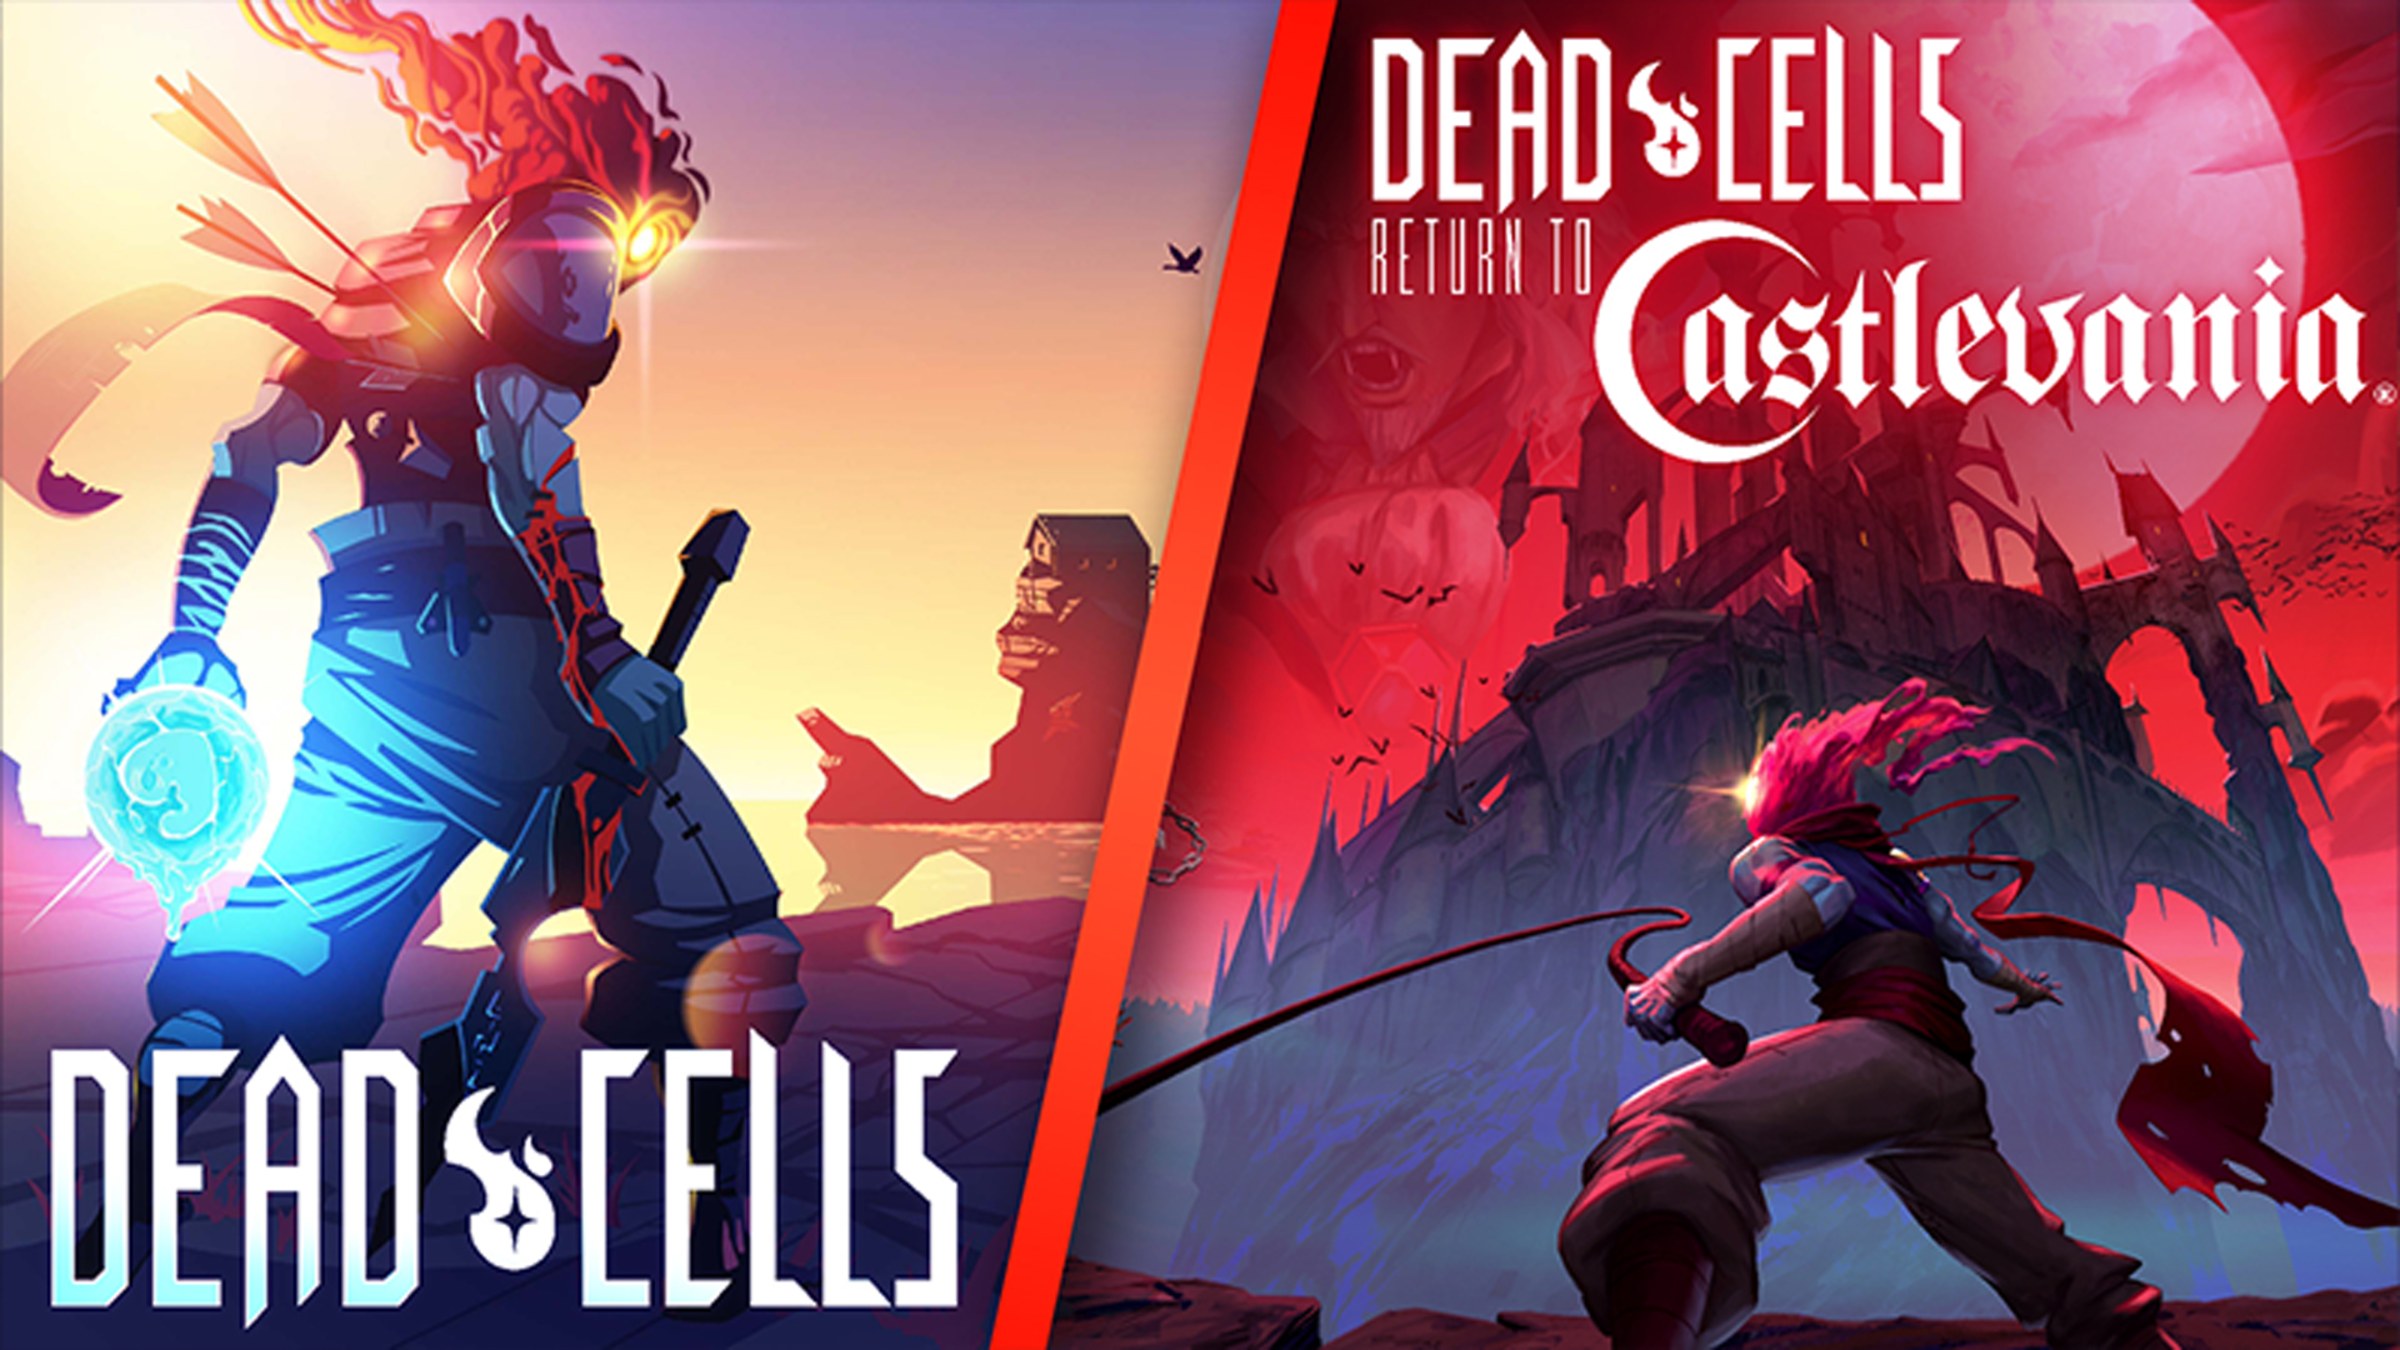 Dead Cells teams up with Castlevania in upcoming DLC